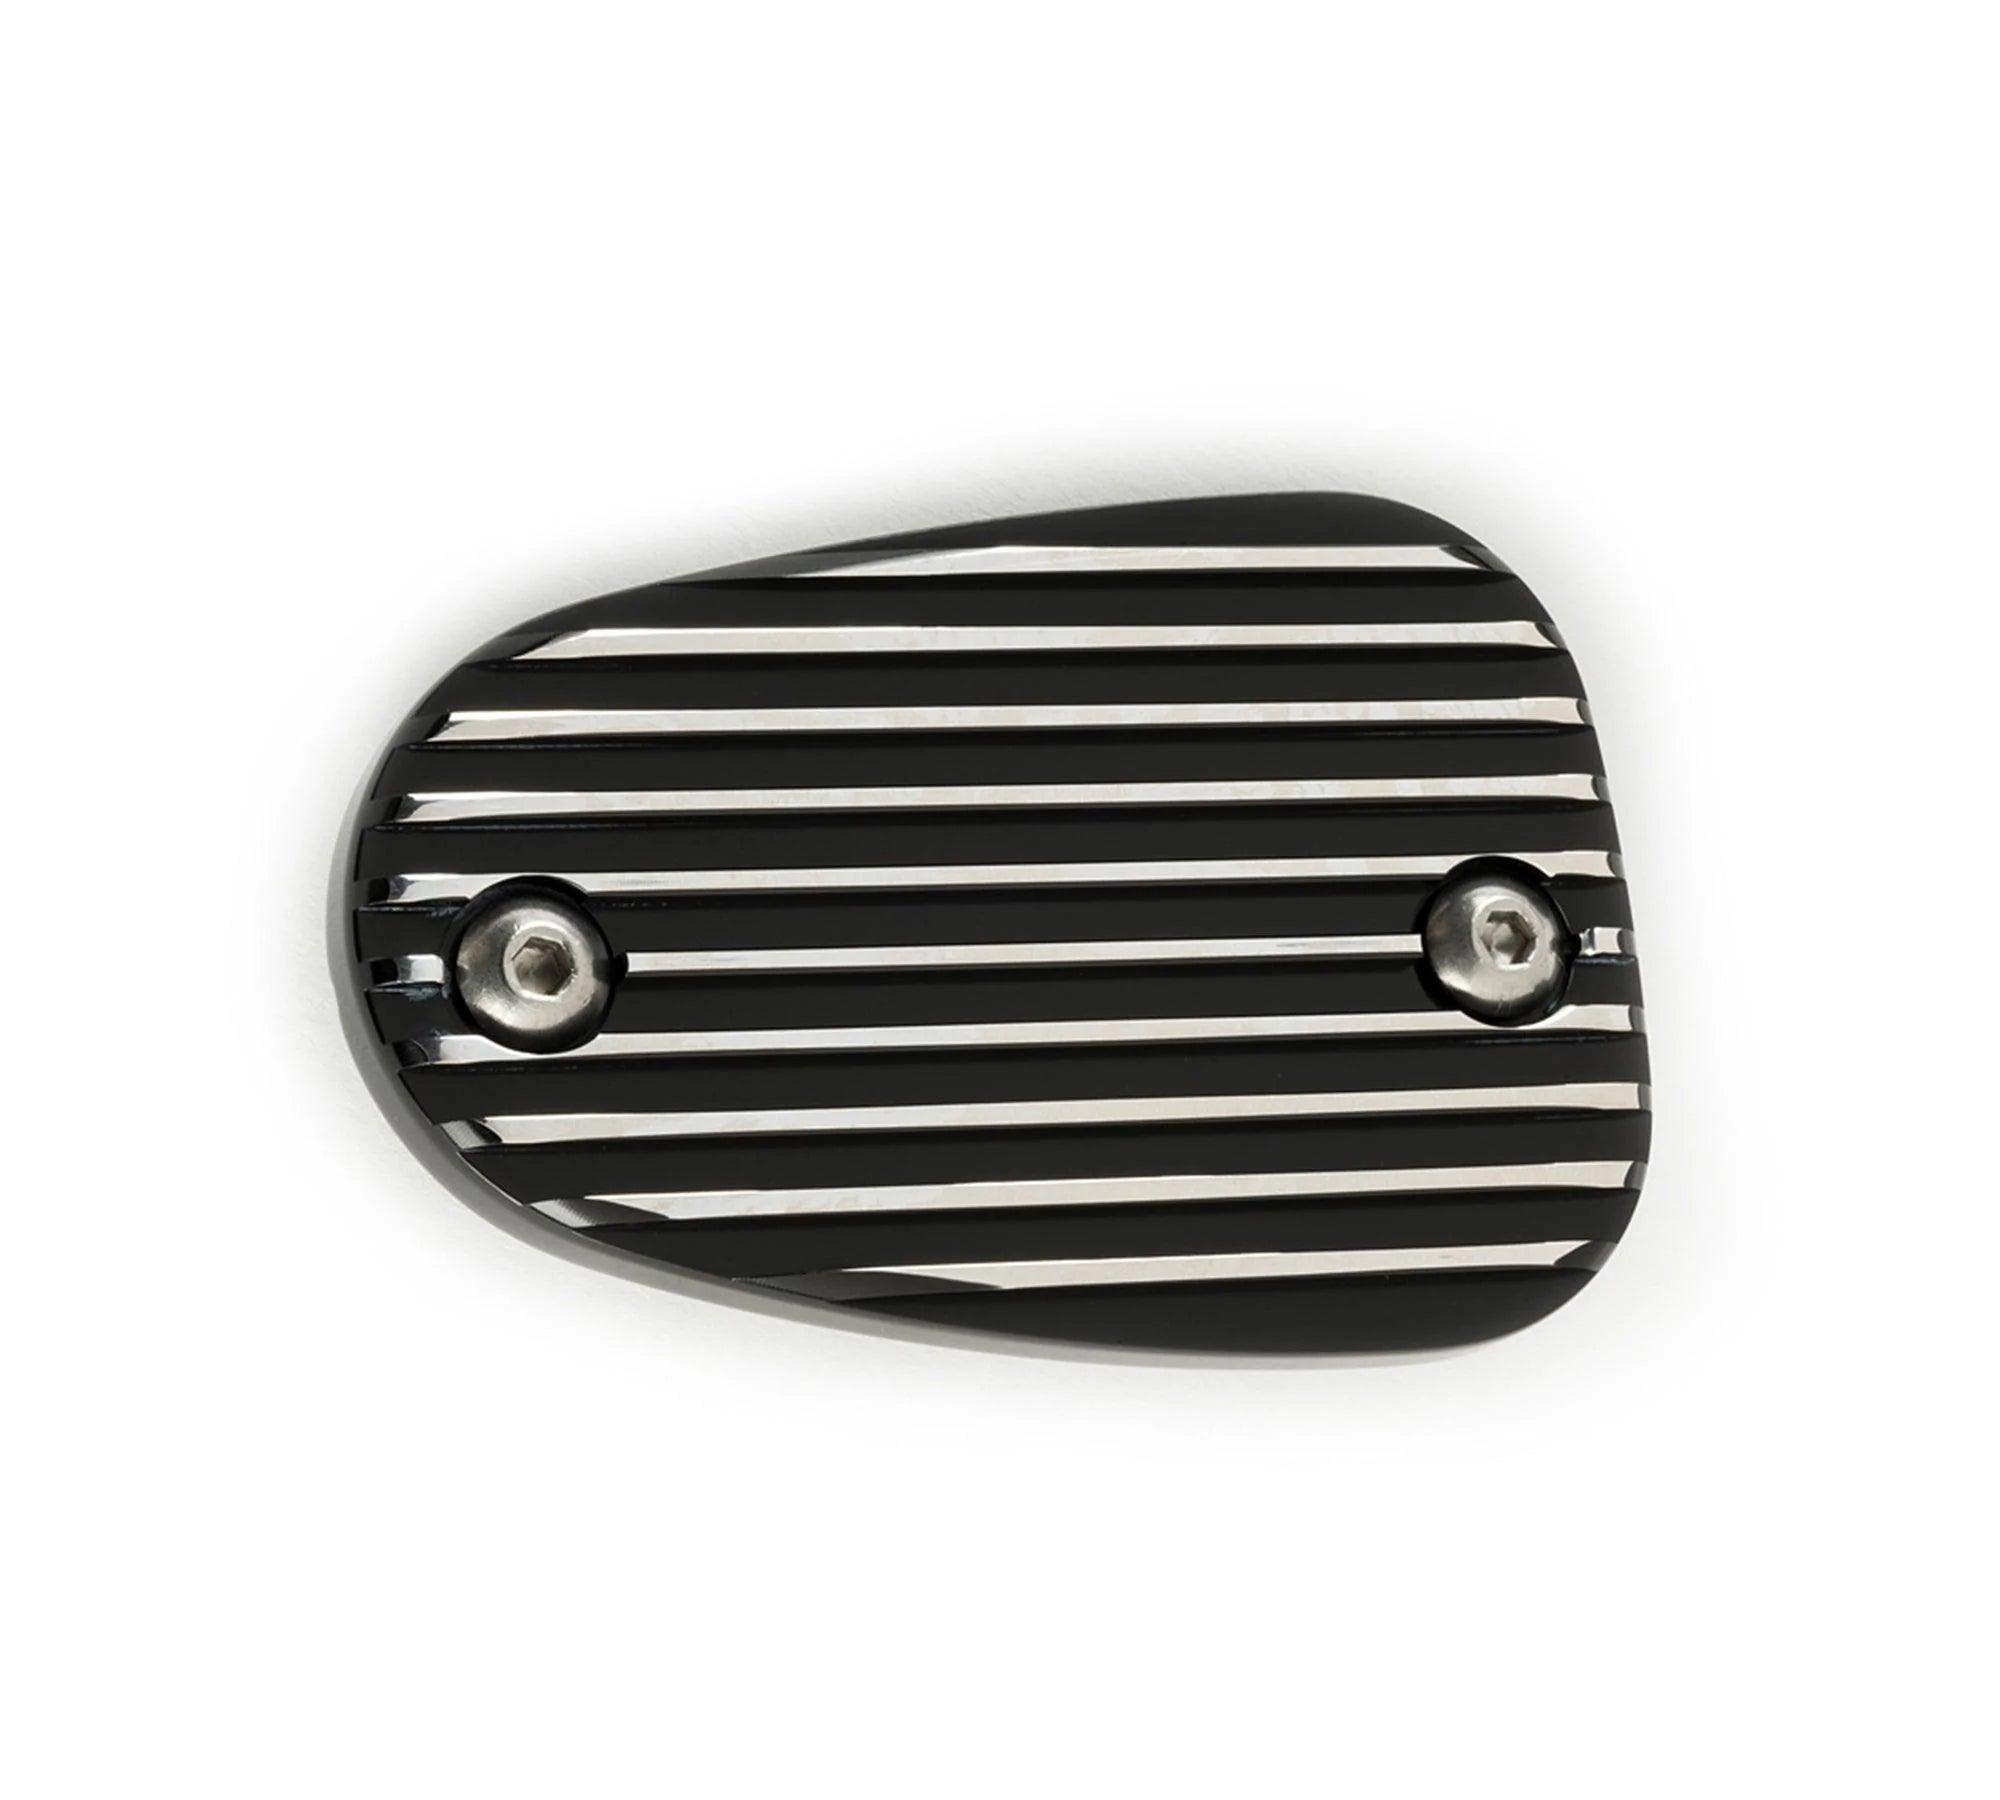 High Quality Finned Master Cylinder Cover for Triumph Motorcycles